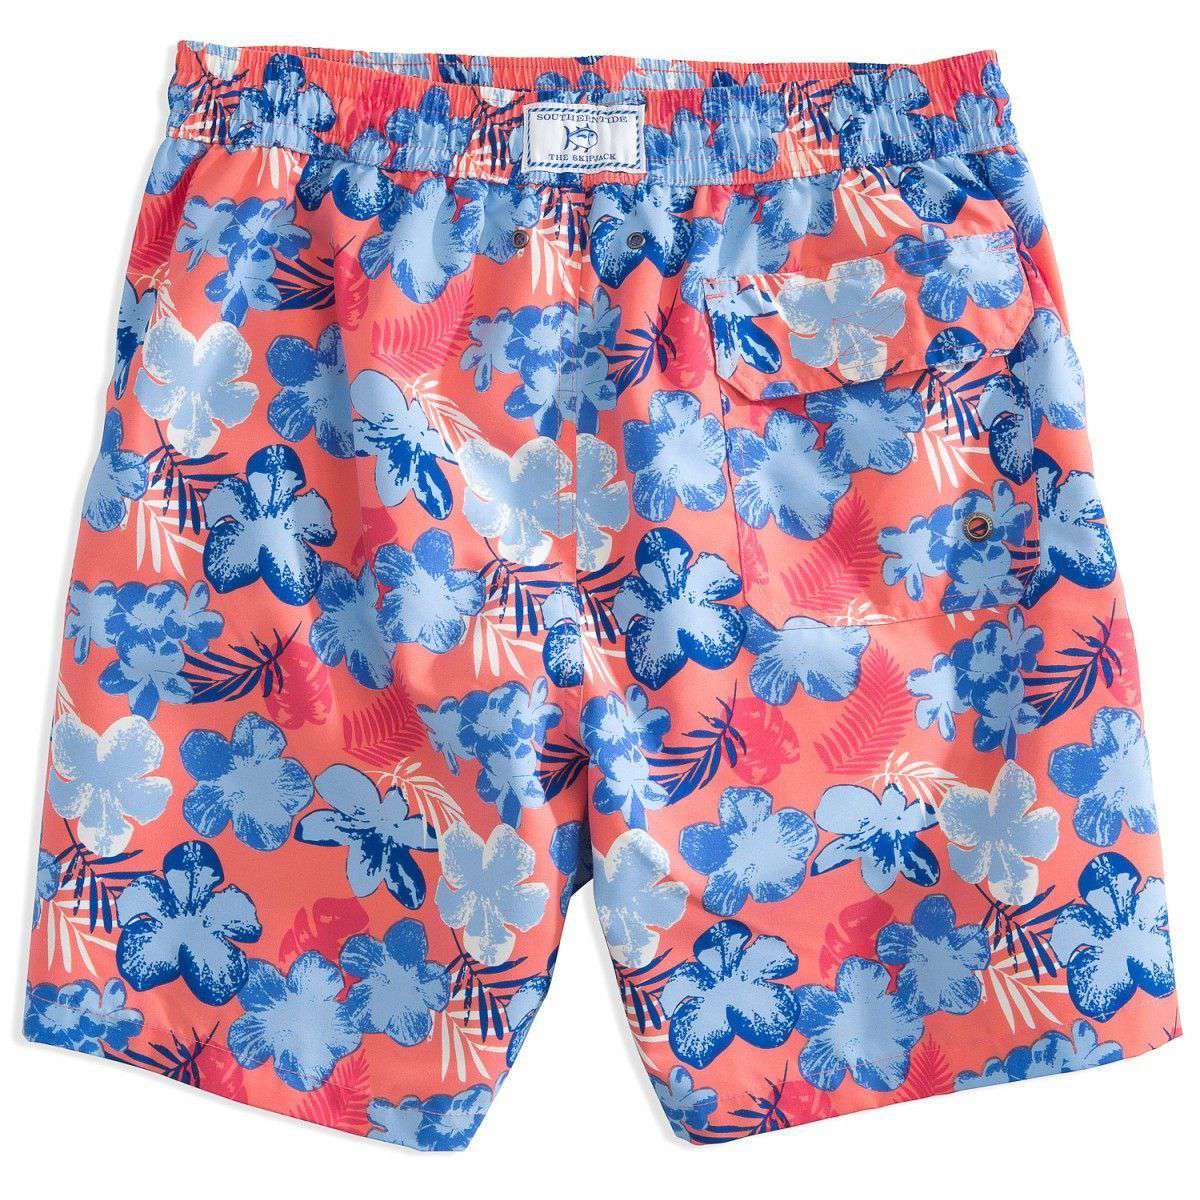 Island Palm Swim Trunks in Coral by Southern Tide - Country Club Prep